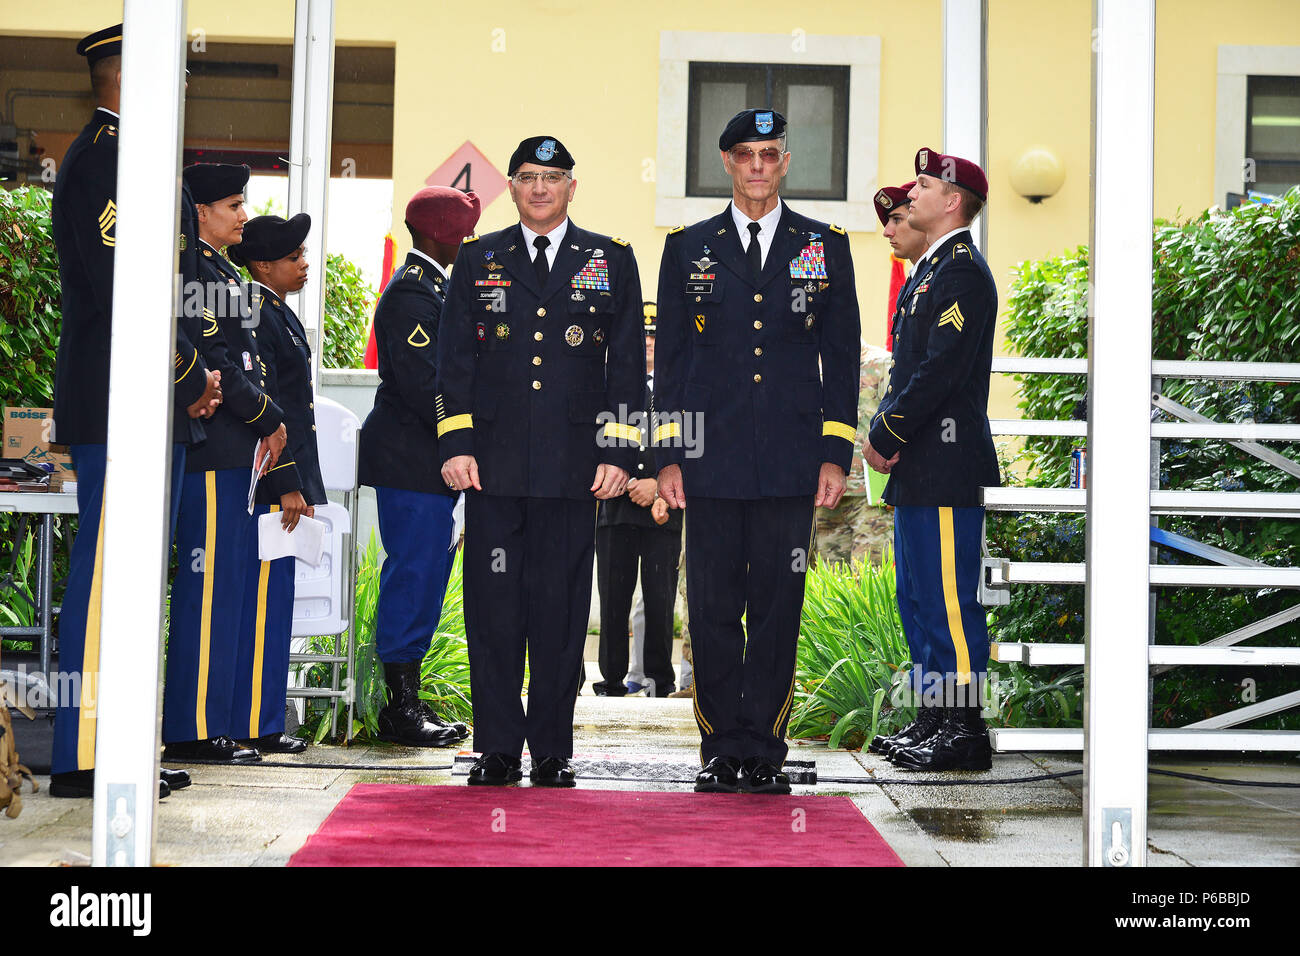 General Curtis M. Scaparrotti, Supreme Allied Commander Europe (SACEUR) commander (left), Maj. Gen. Gordon B. “Skip” Davis Jr., Combined Security Transition Command – Afghanistan, Commander (right), during a retirement ceremony at Caserma C. Ederle Vicenza, Italy, June 22, 2018. (U.S. Army photo by Paolo Bovo). Stock Photo